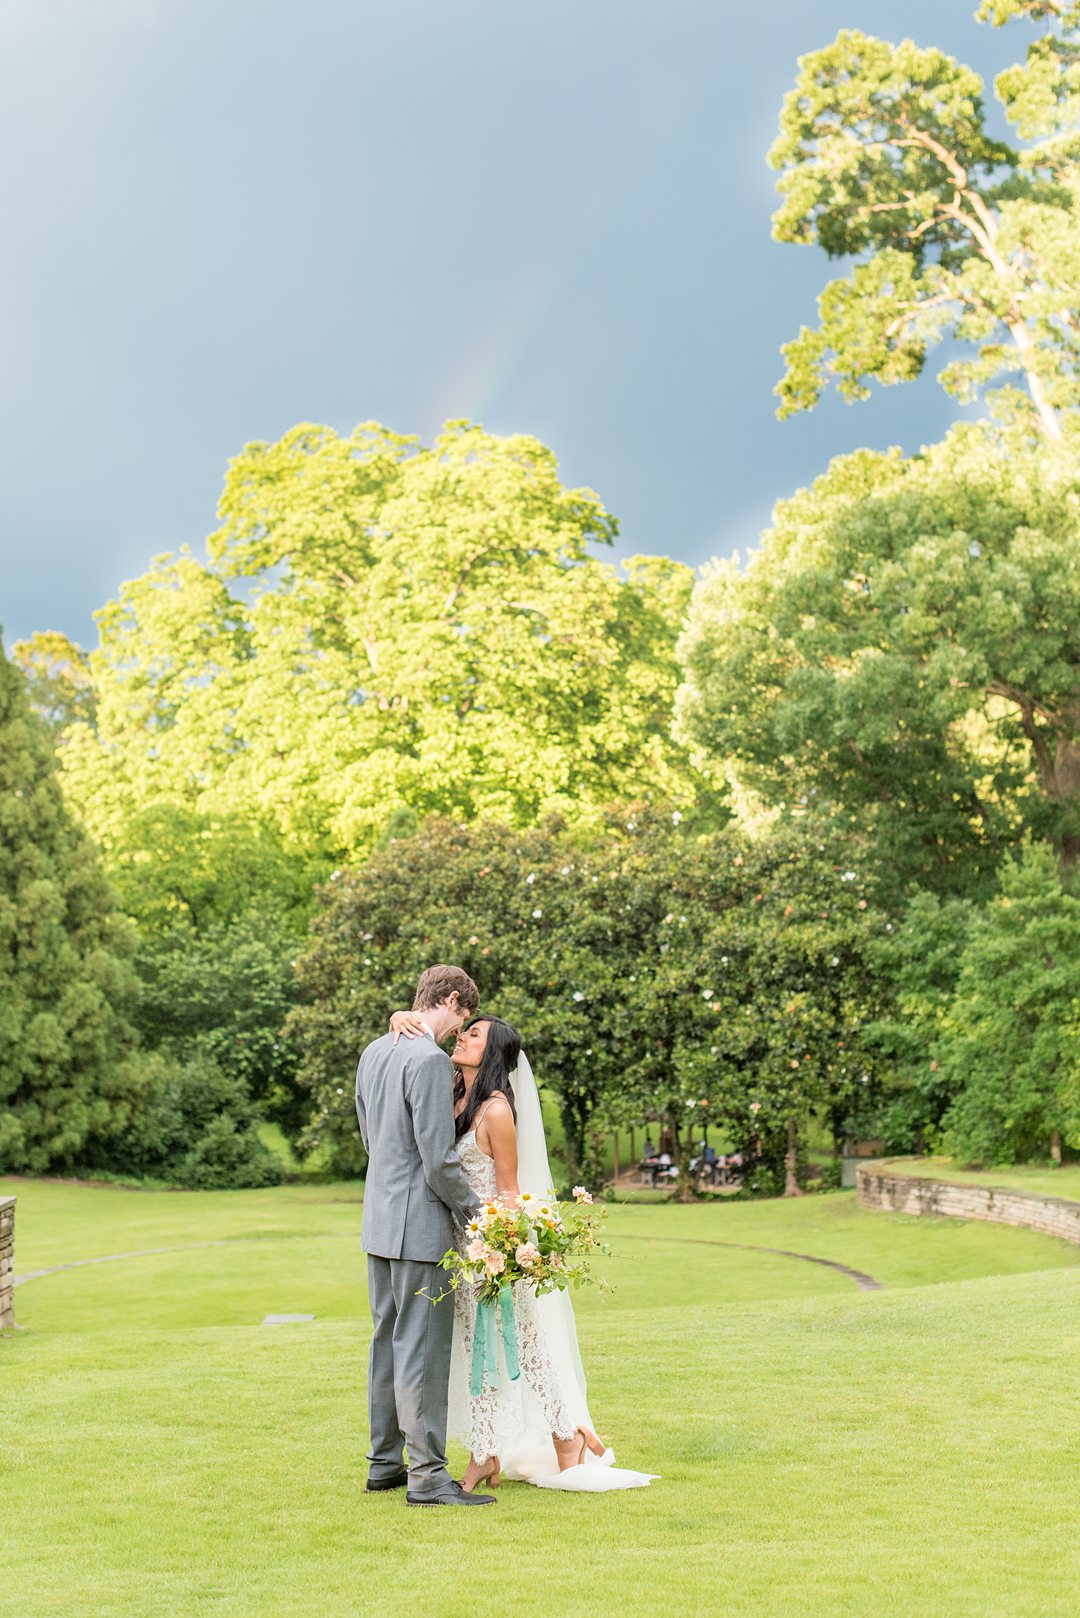 A couple was rewarded with an elopement rainbow after putting up with the storm of Coronavirus and changing their original wedding plans. Small outdoor ceremony in Raleigh, NC captured by Mikkel Paige Photography. #mikkelpaige #raleighelopement #raleighsmallwedding 